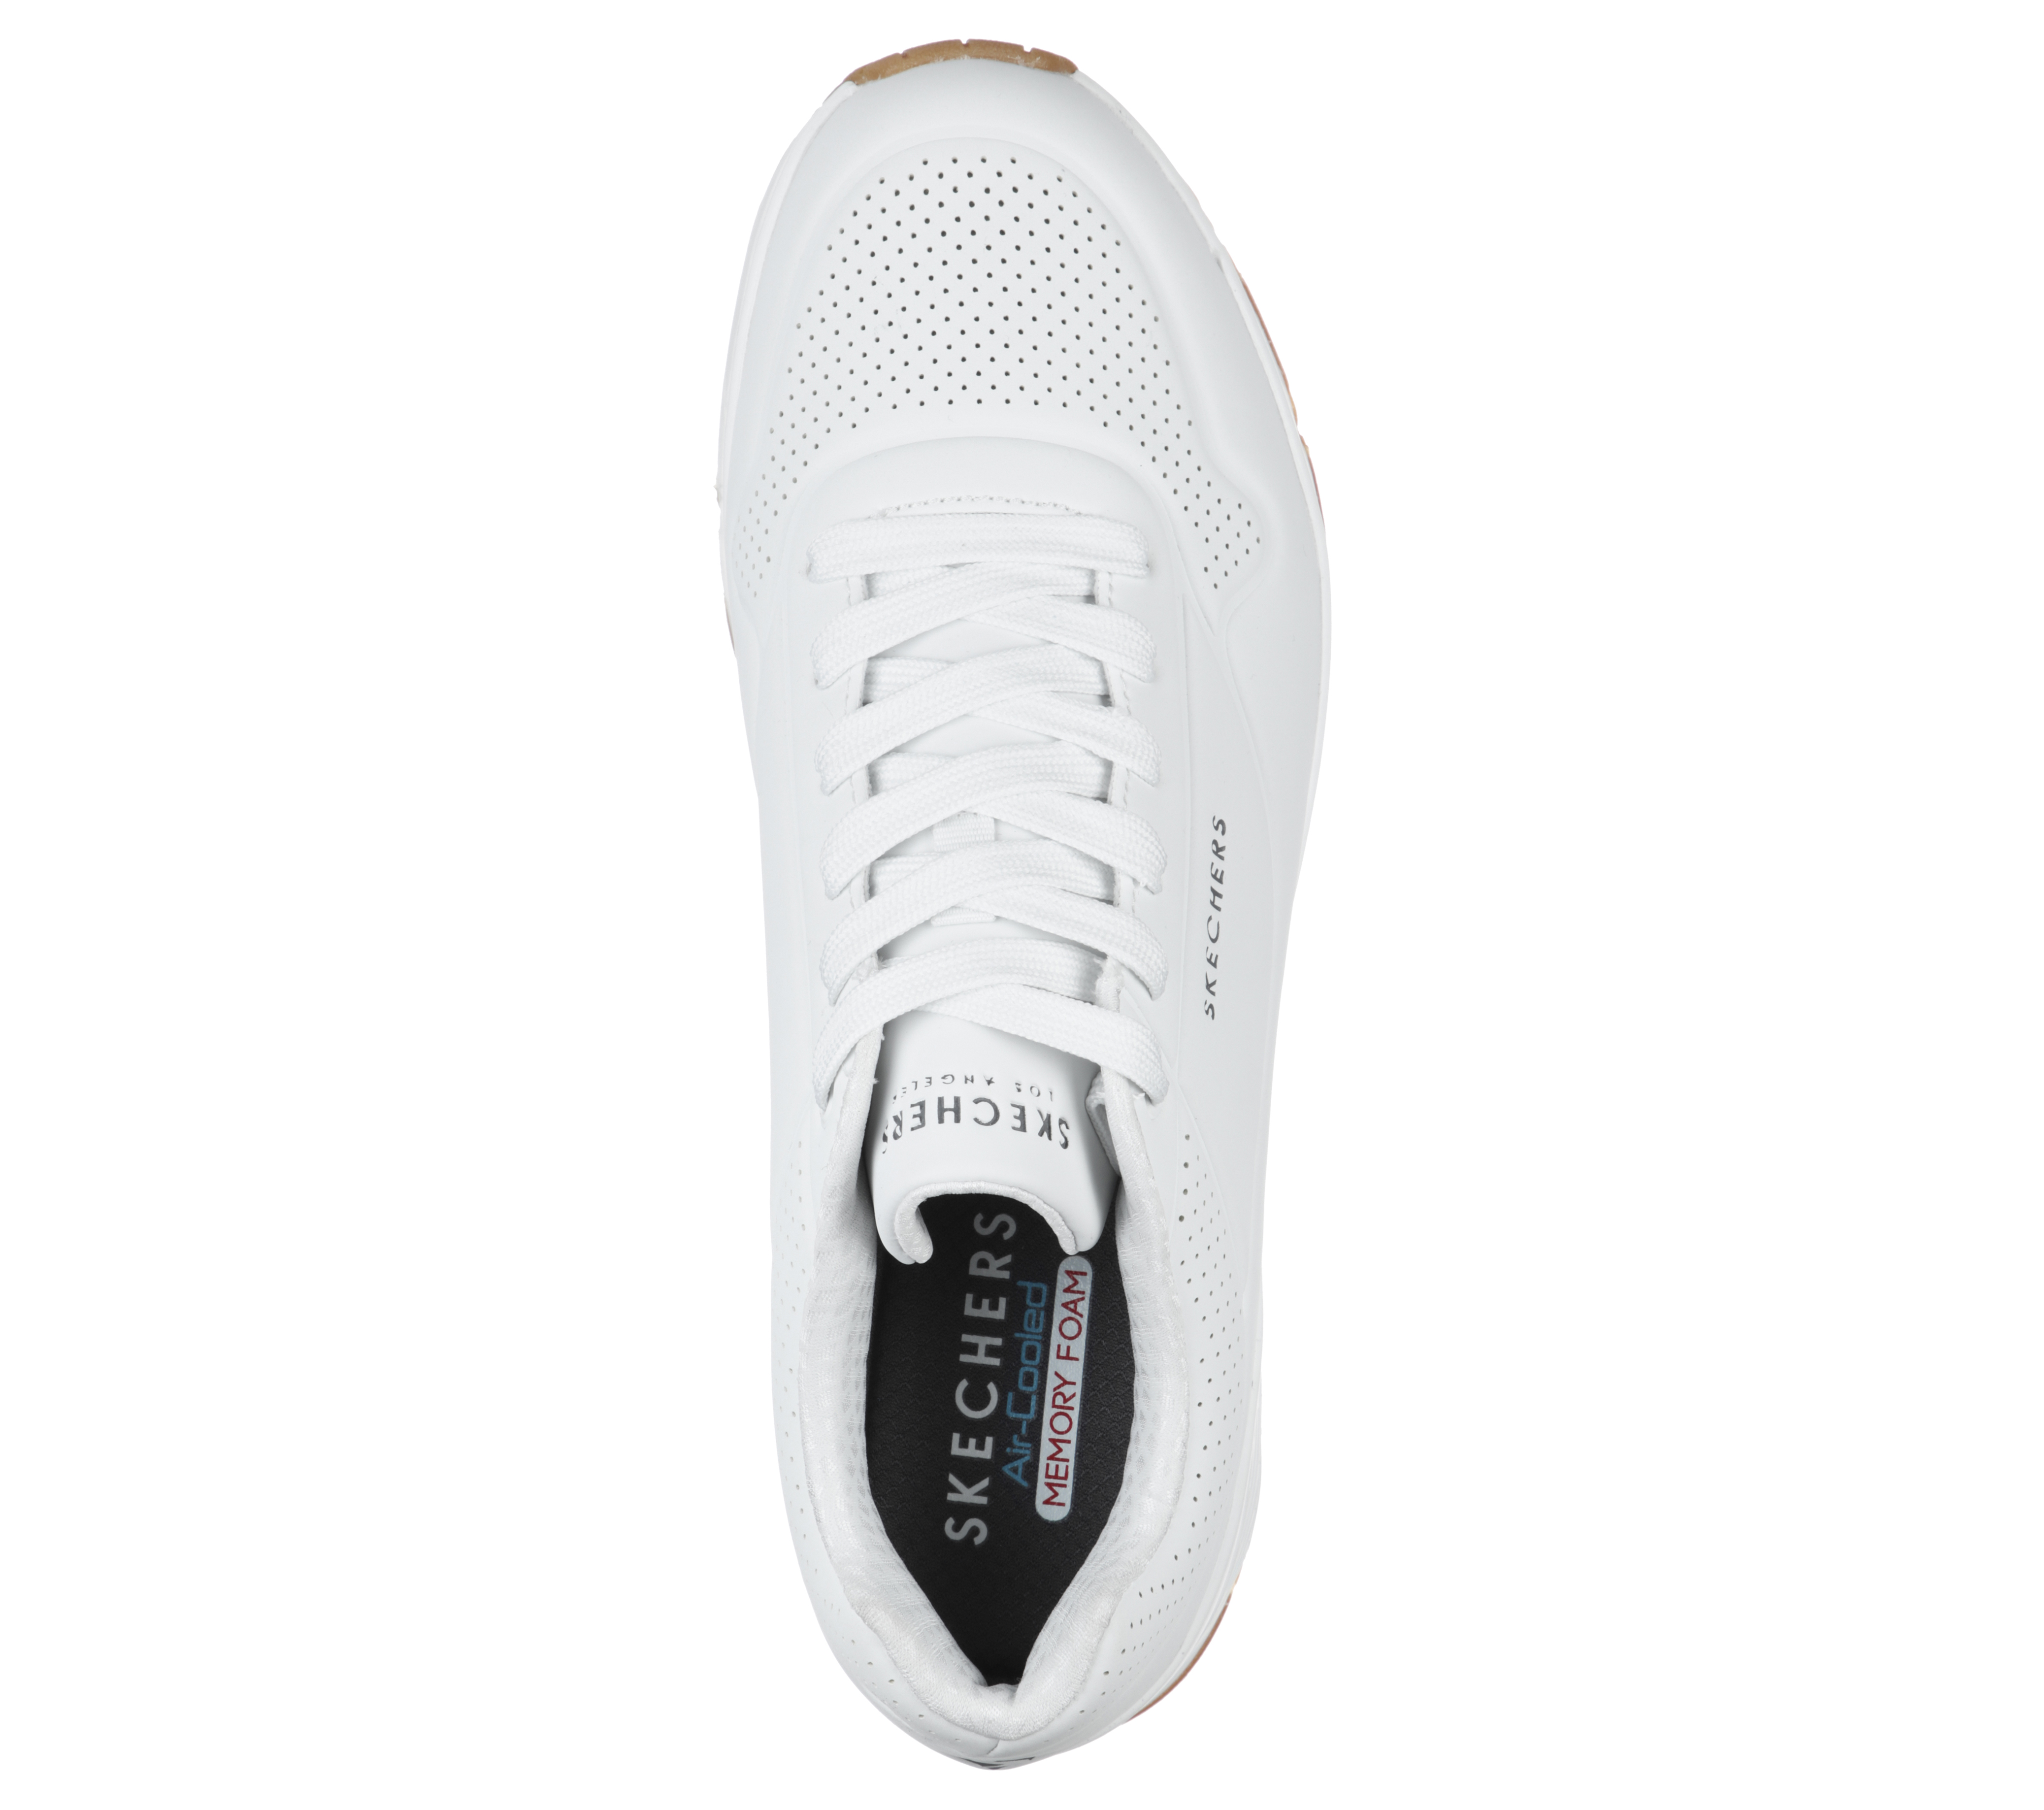 Uno Stand On Air SKECHERS CZ